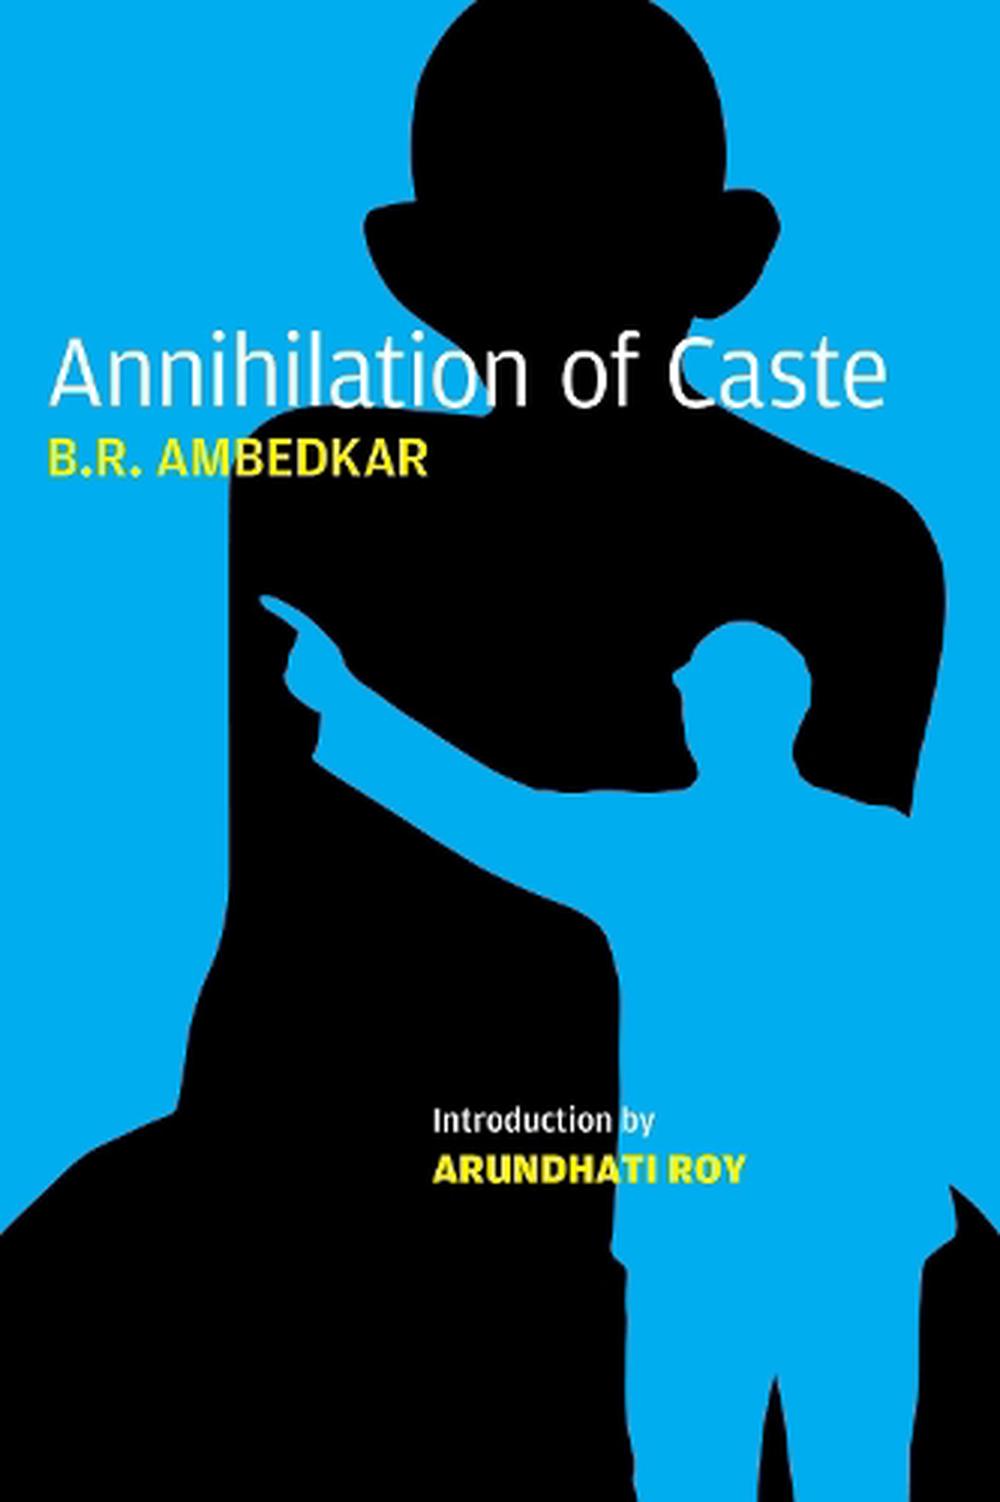 what is the central thesis of annihilation of caste